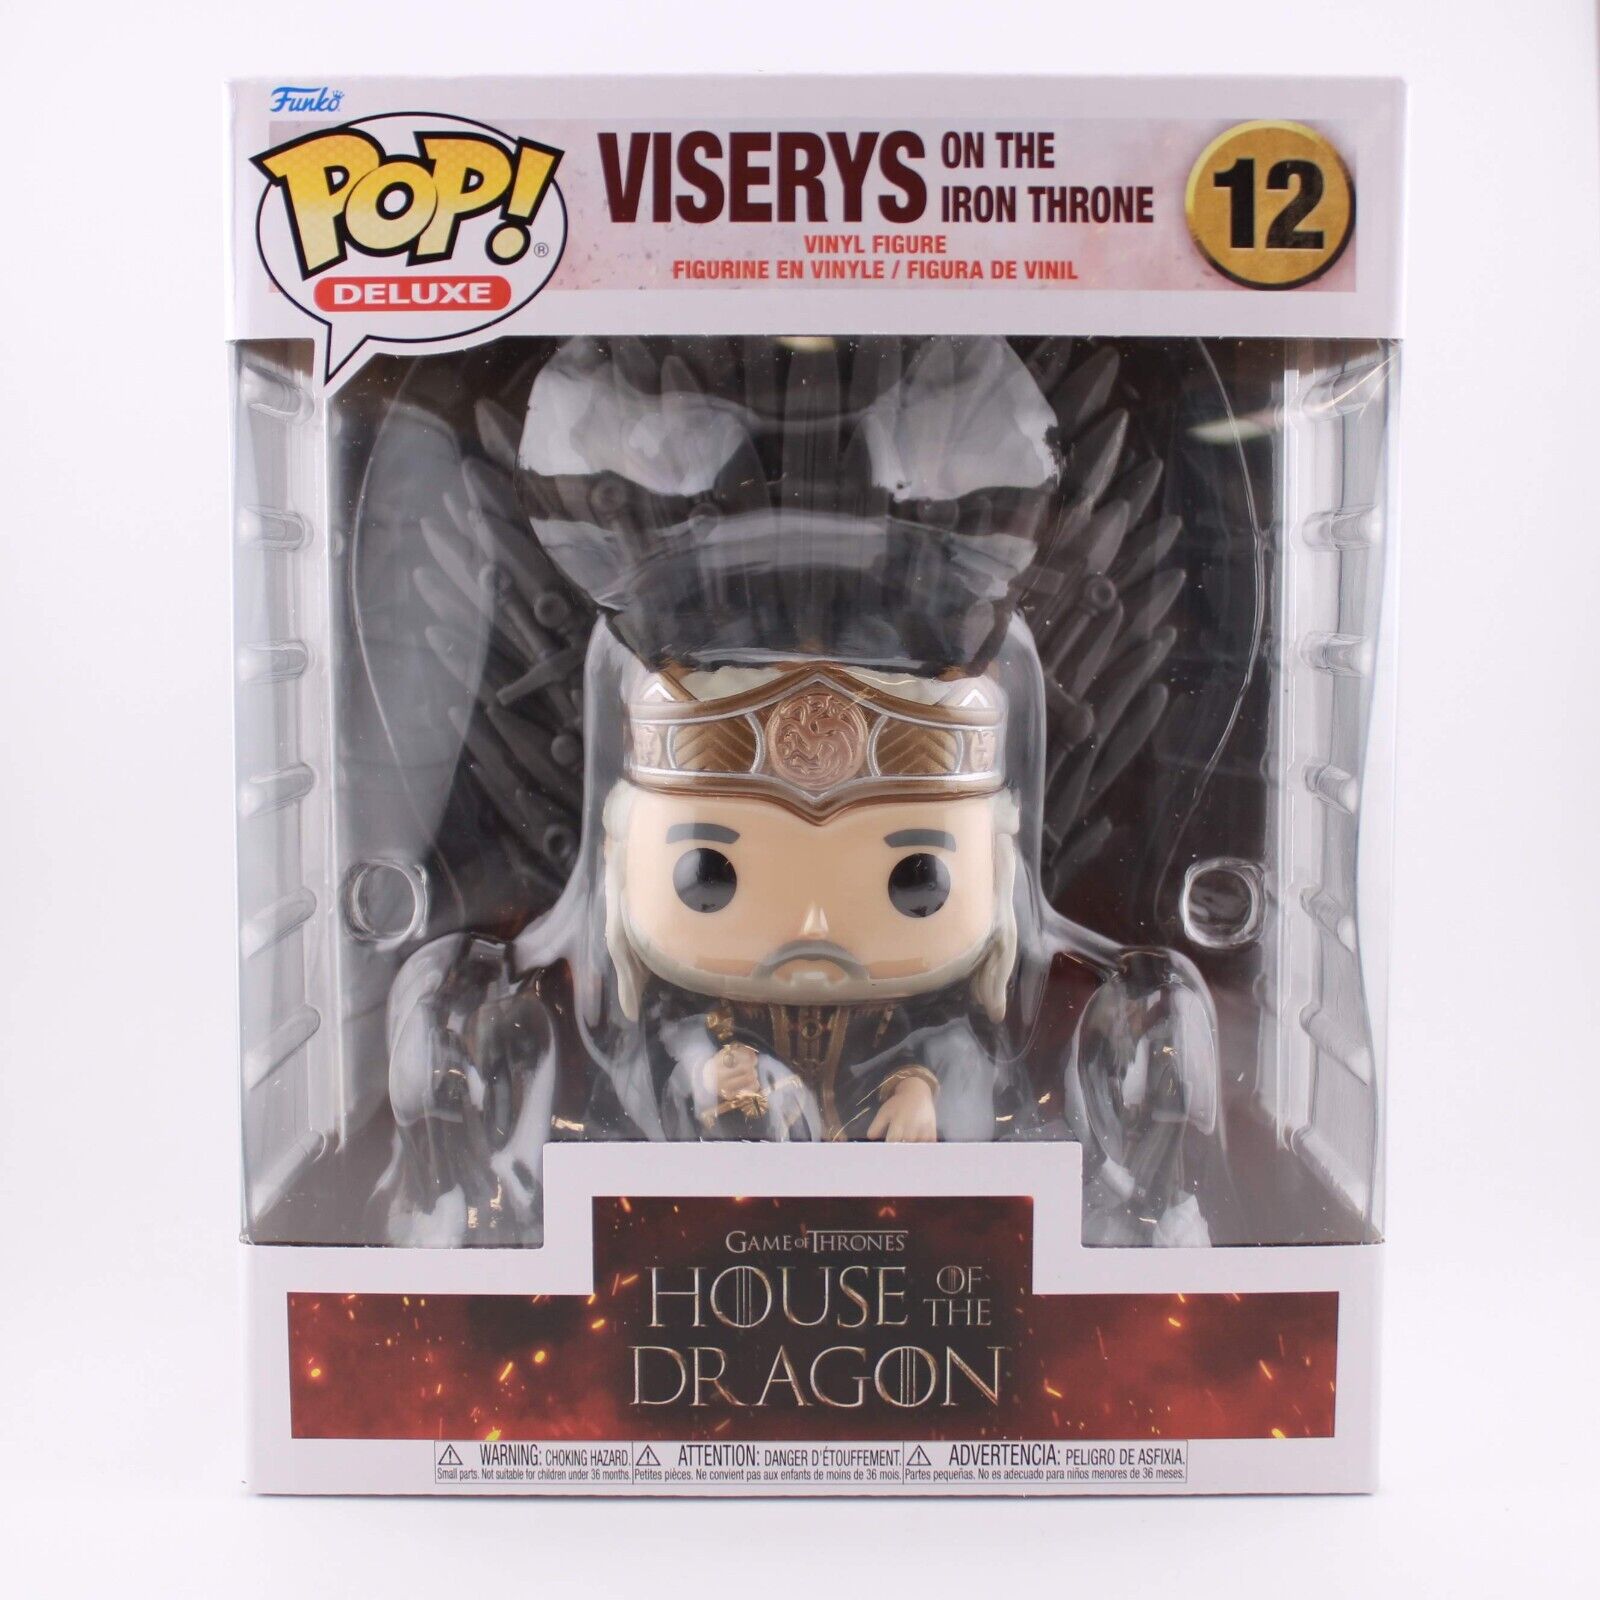 Funko Pop House of the Dragon - Viserys on the Iron Throne Deluxe